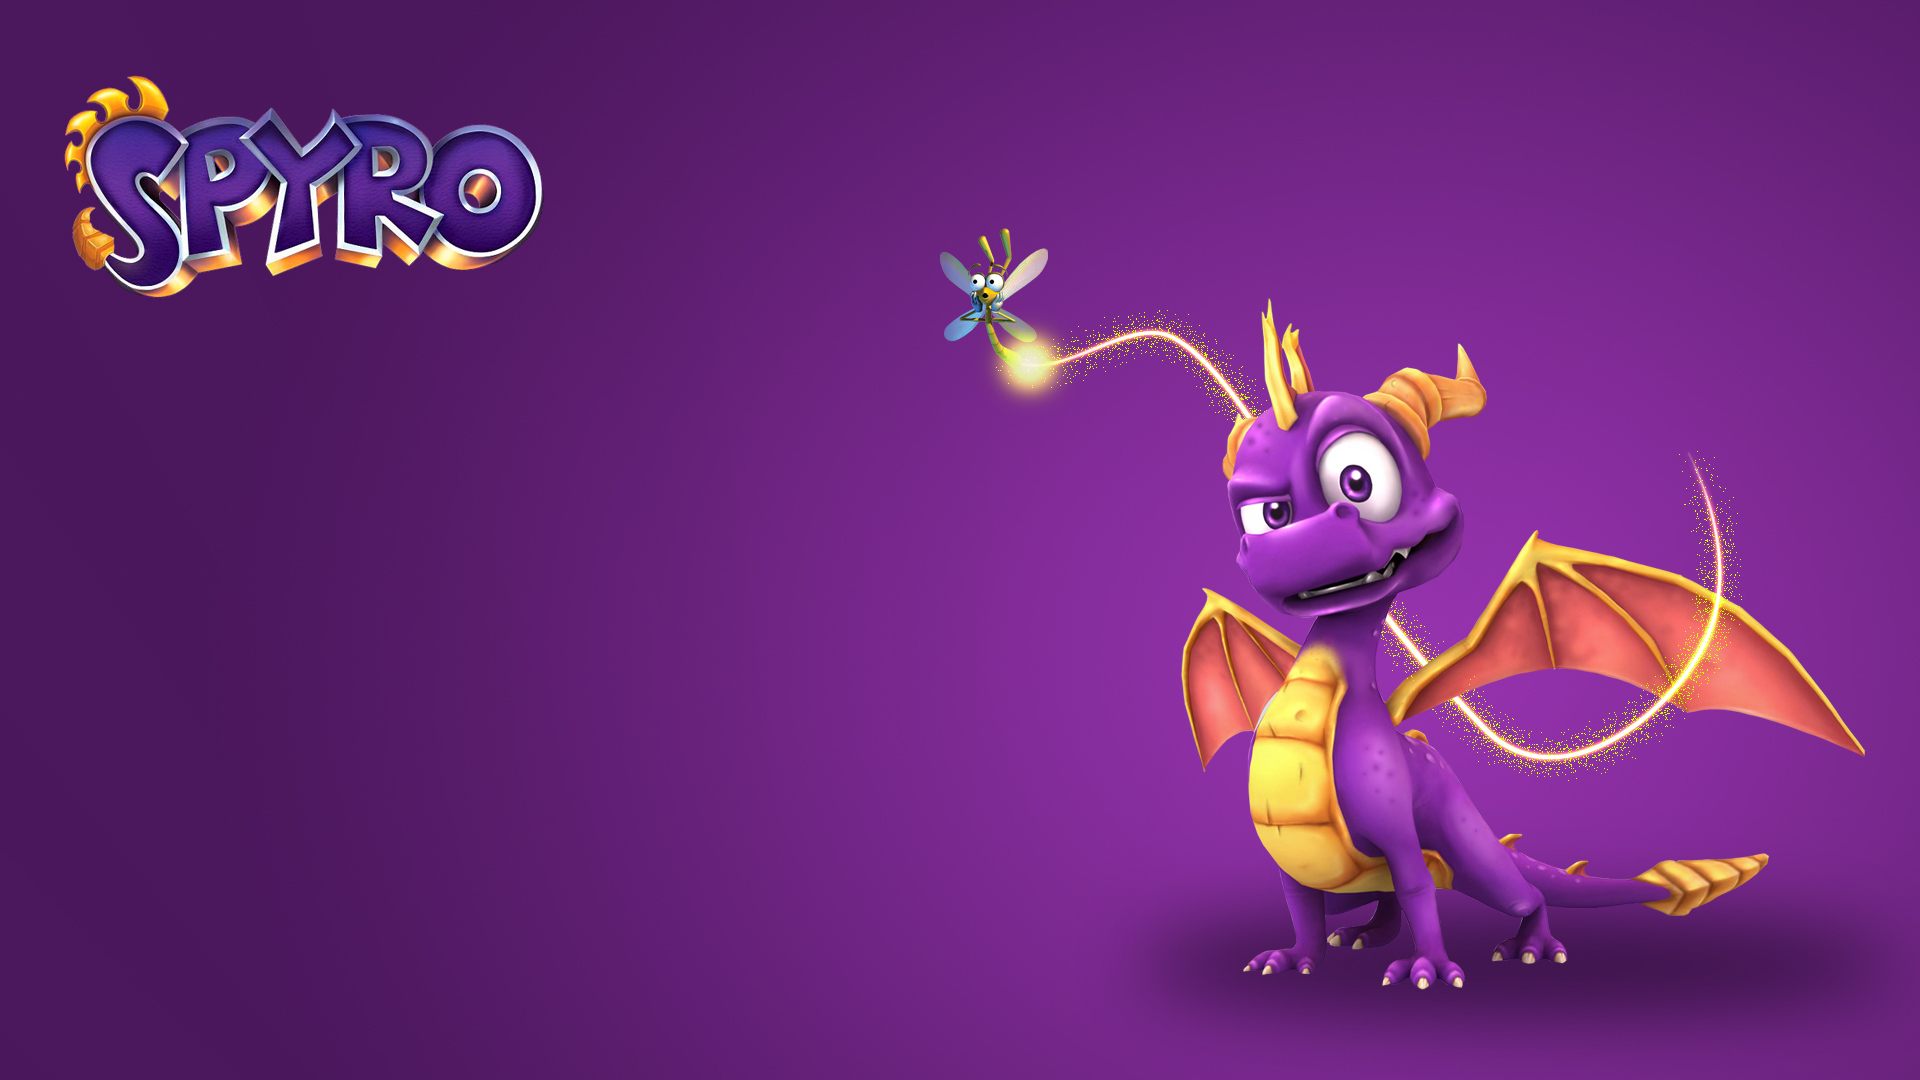 1920x1080 The Legend of Spyro: A New Beginning HD Wallpapers and Backgrounds